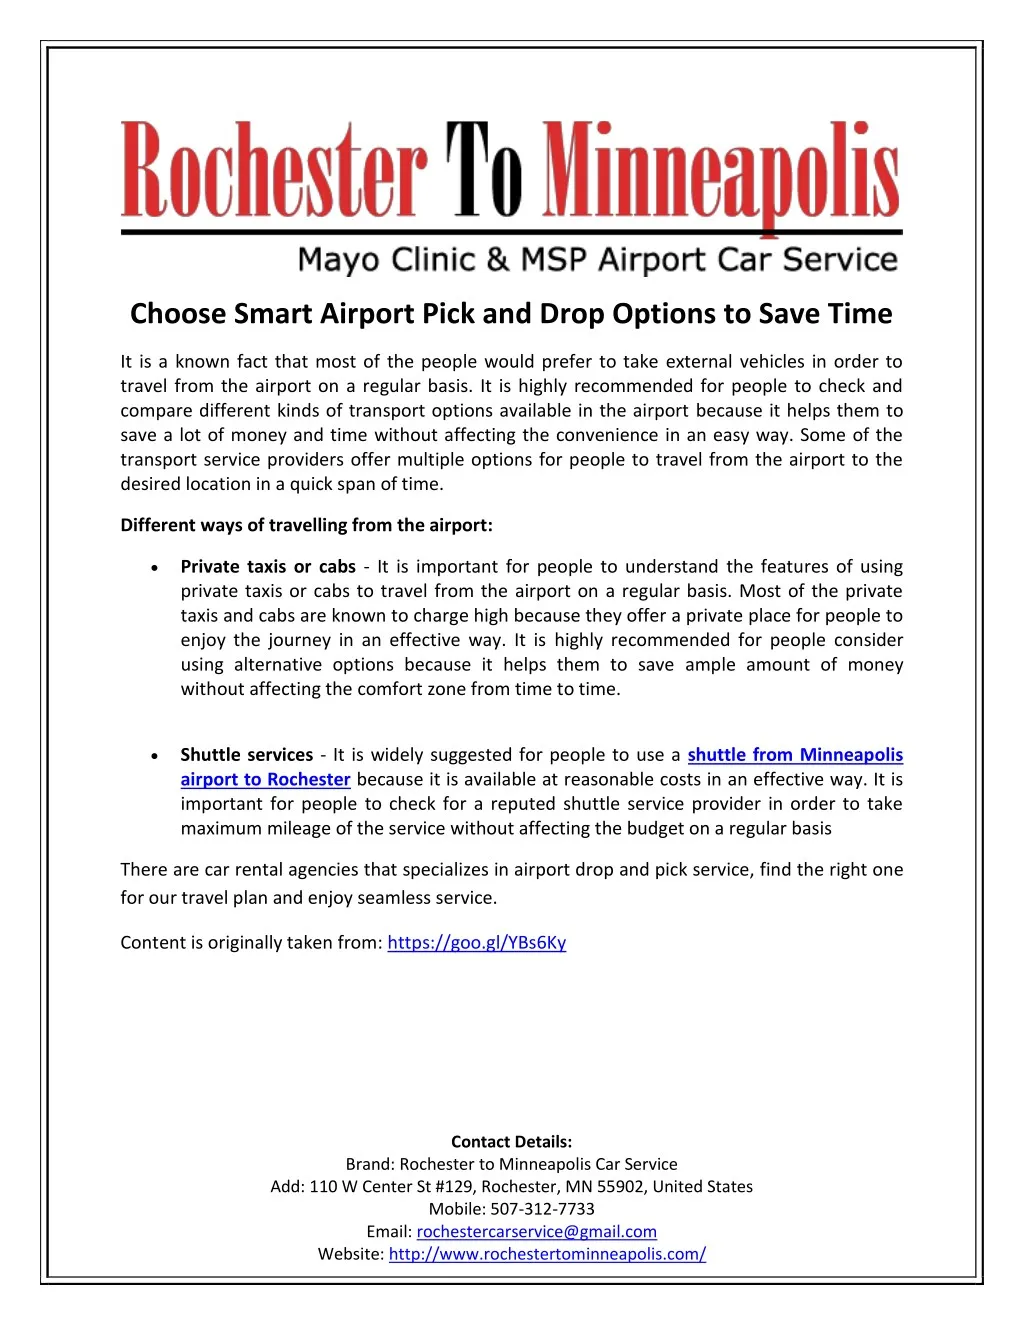 choose smart airport pick and drop options